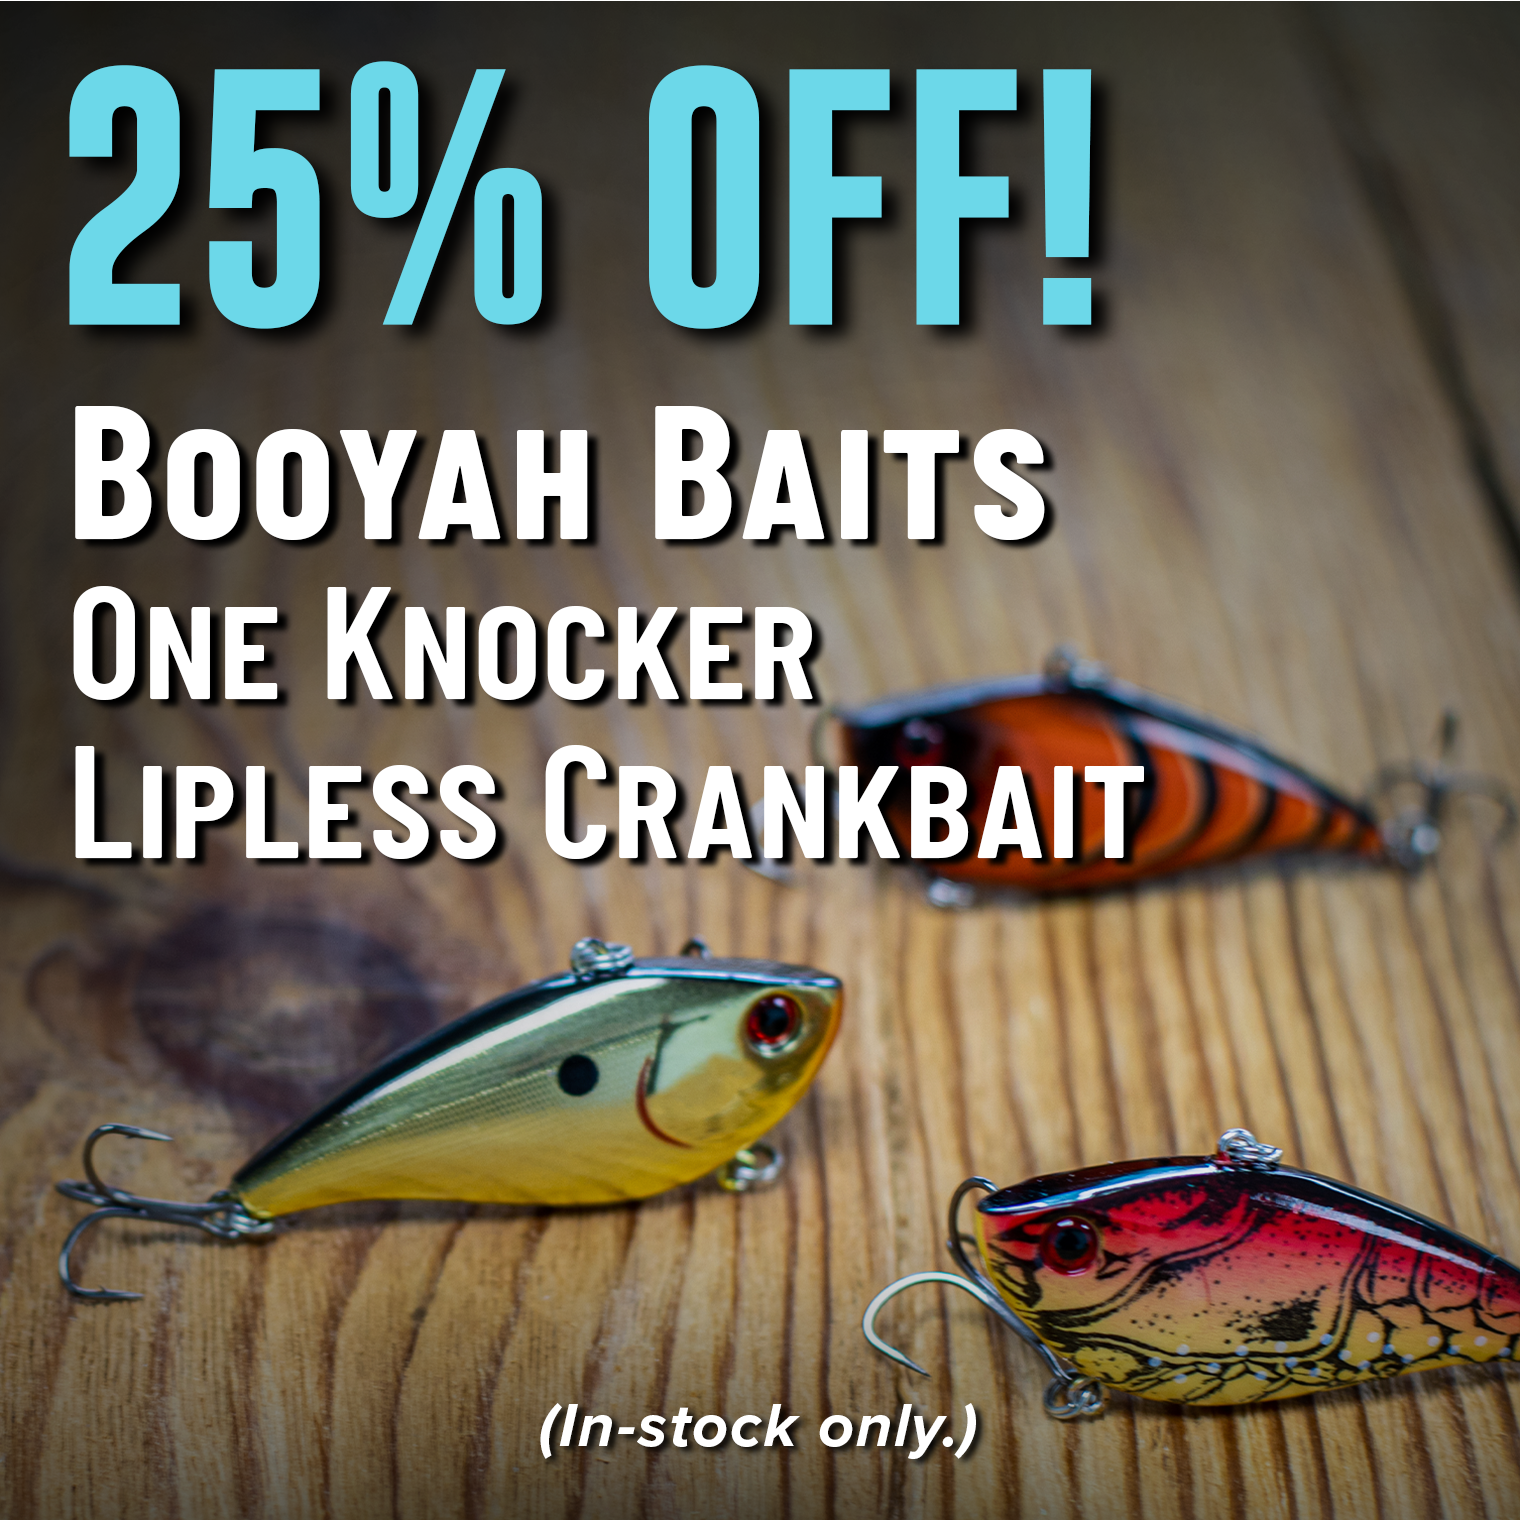 25% Off! Booyah Baits One Knocker Lipless Crankbait (In-stock only,)